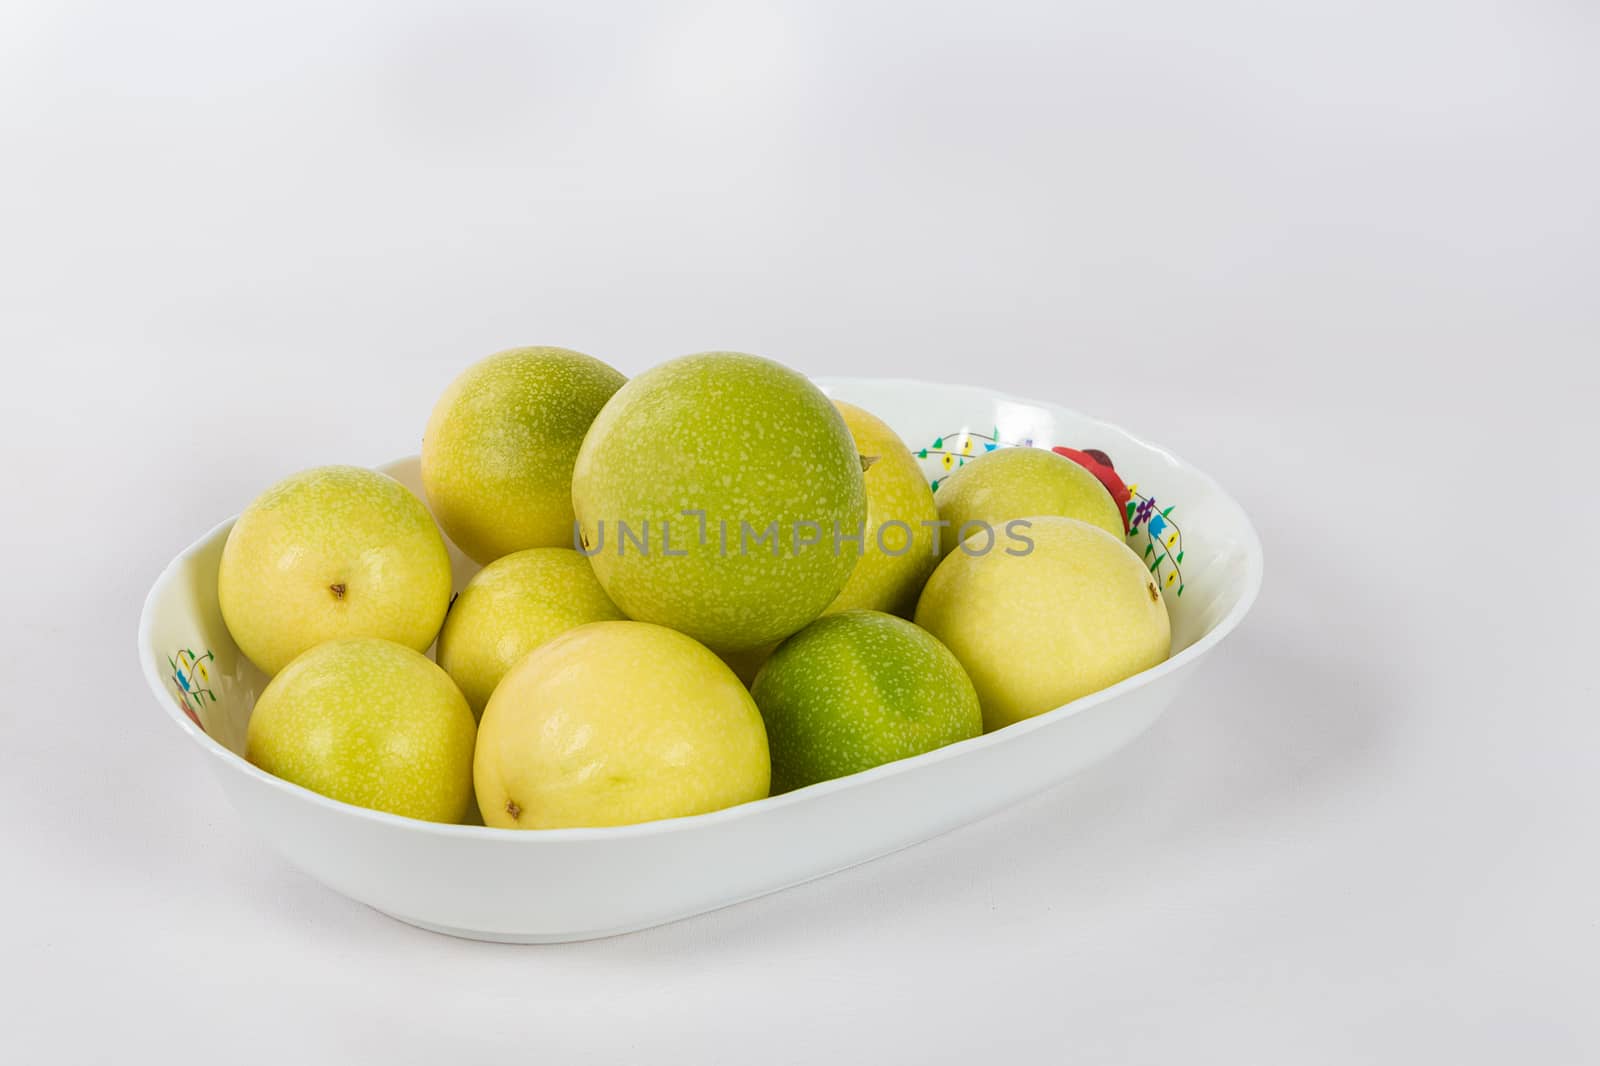 A group of ten passion fruit in a bowl on a white background